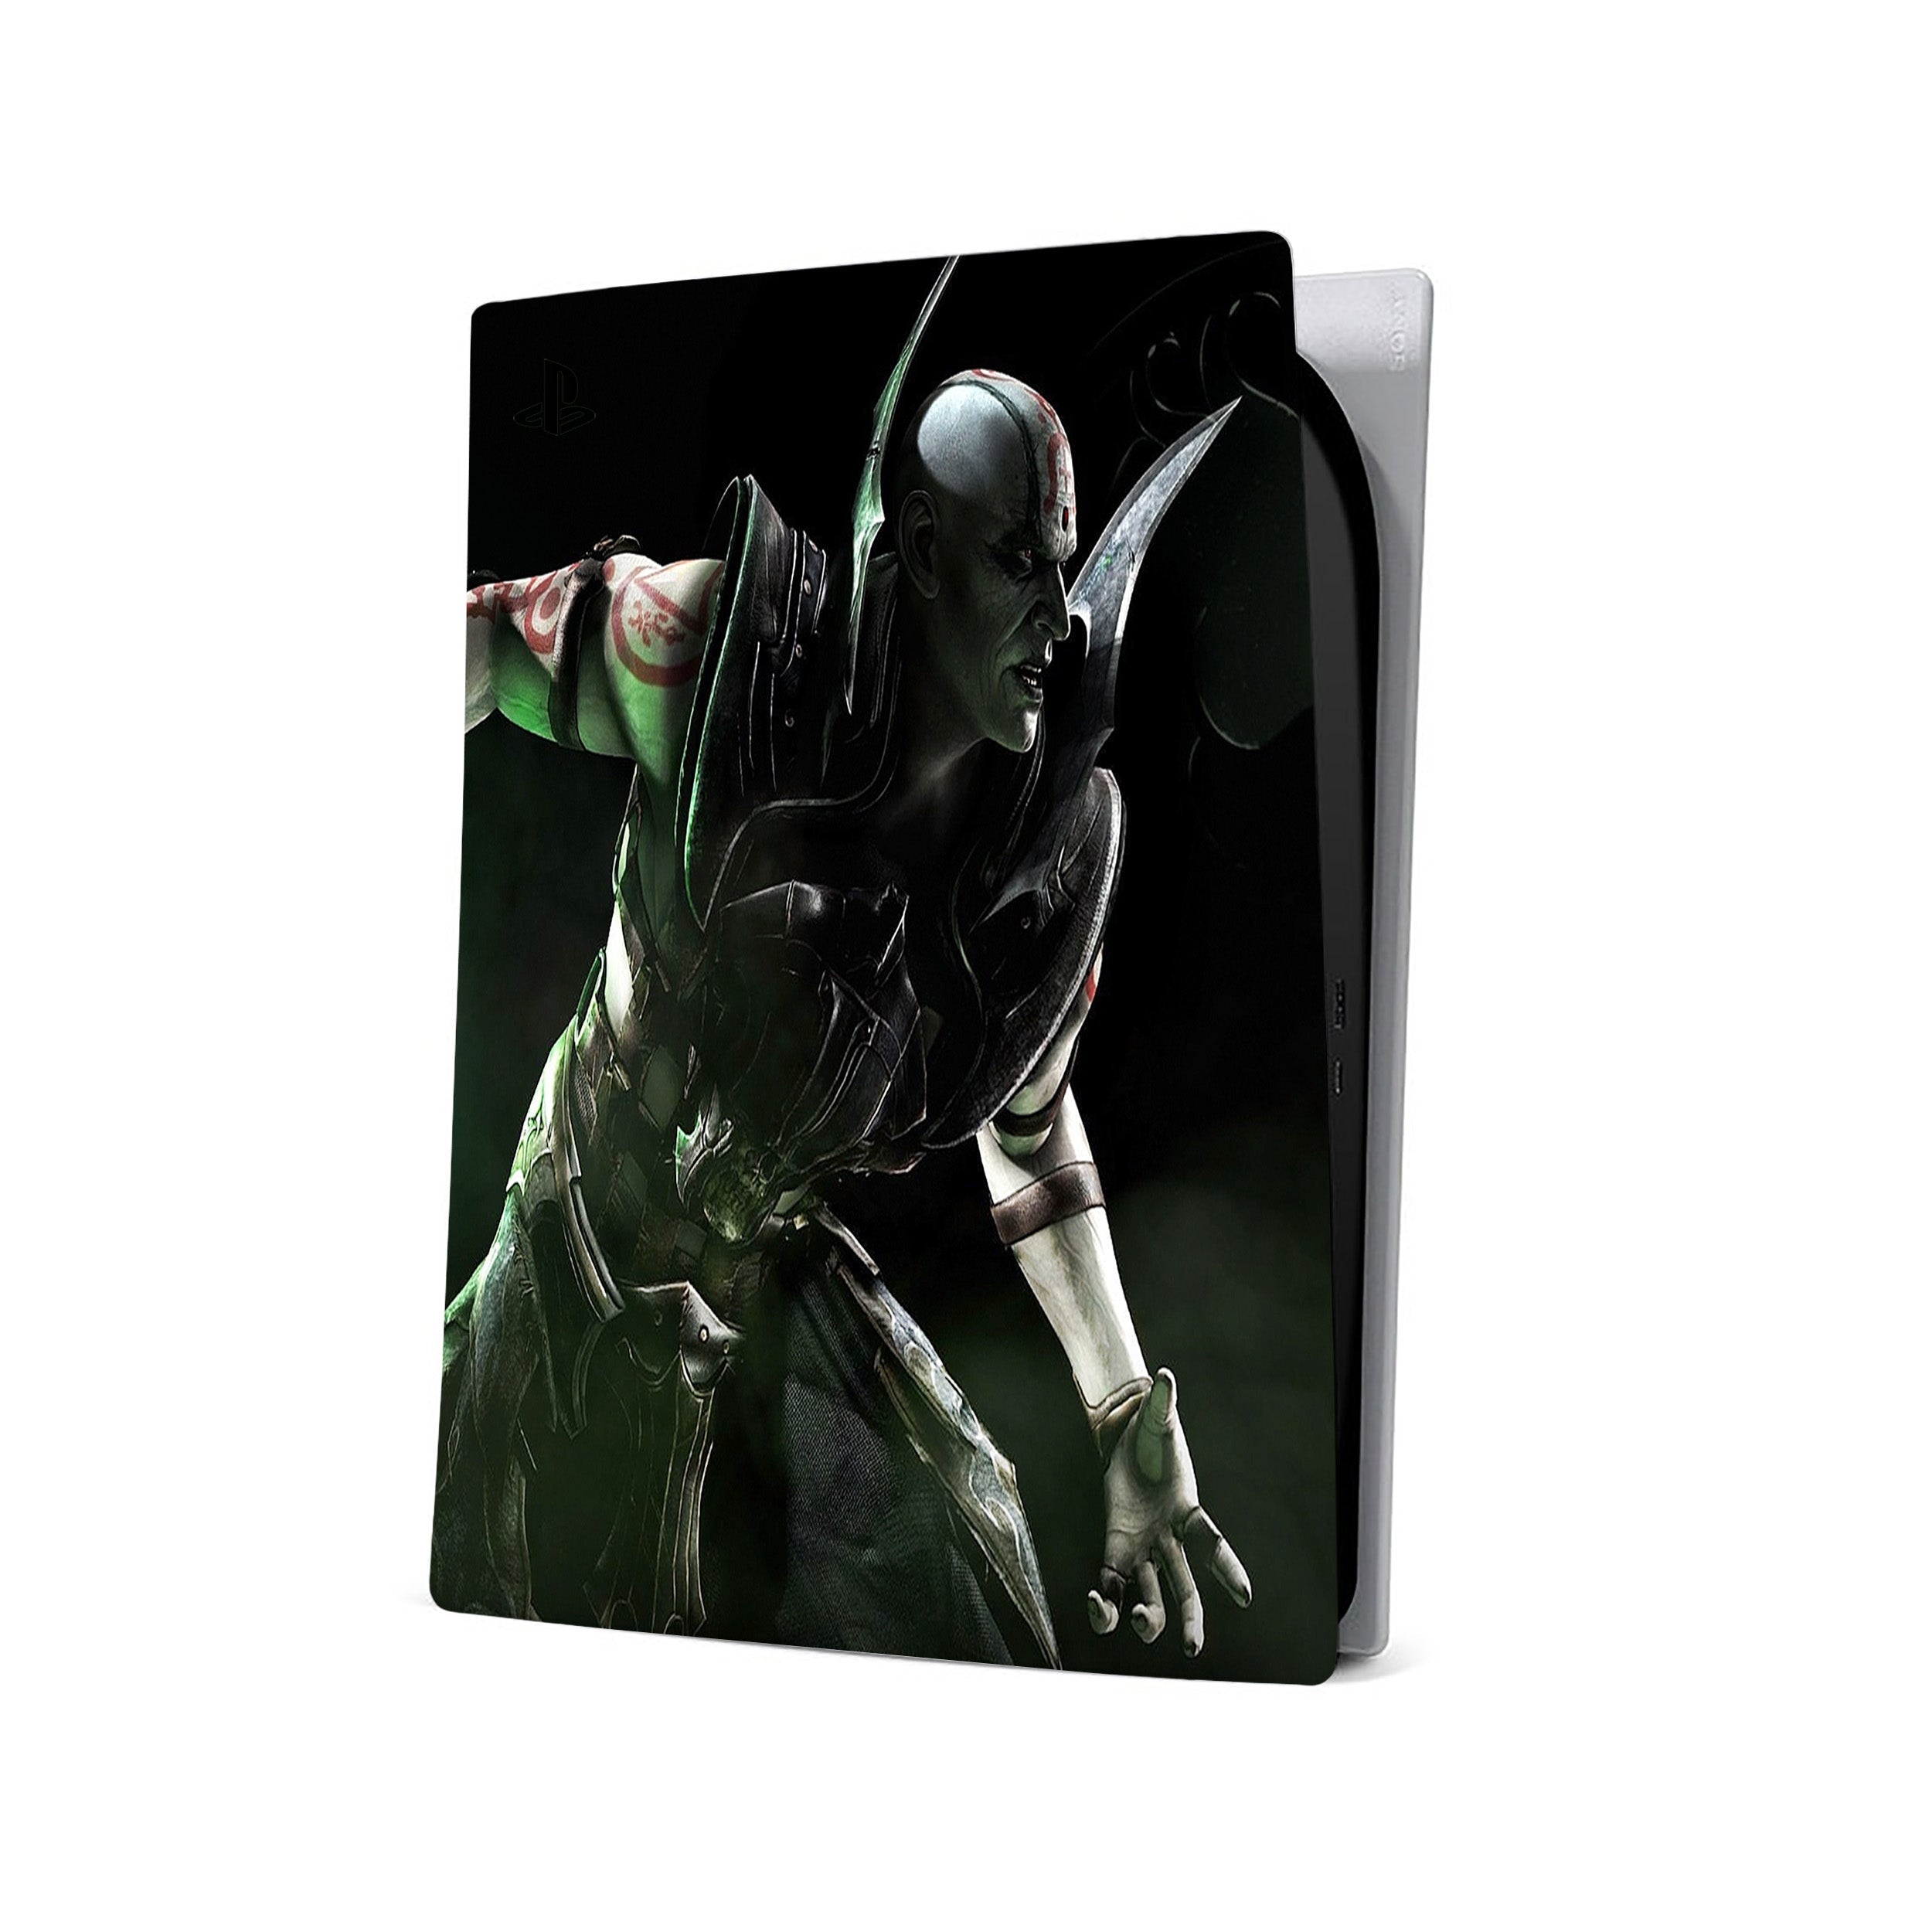 A video game skin featuring a Mortal Kombat Quan Chi design for the PS5.